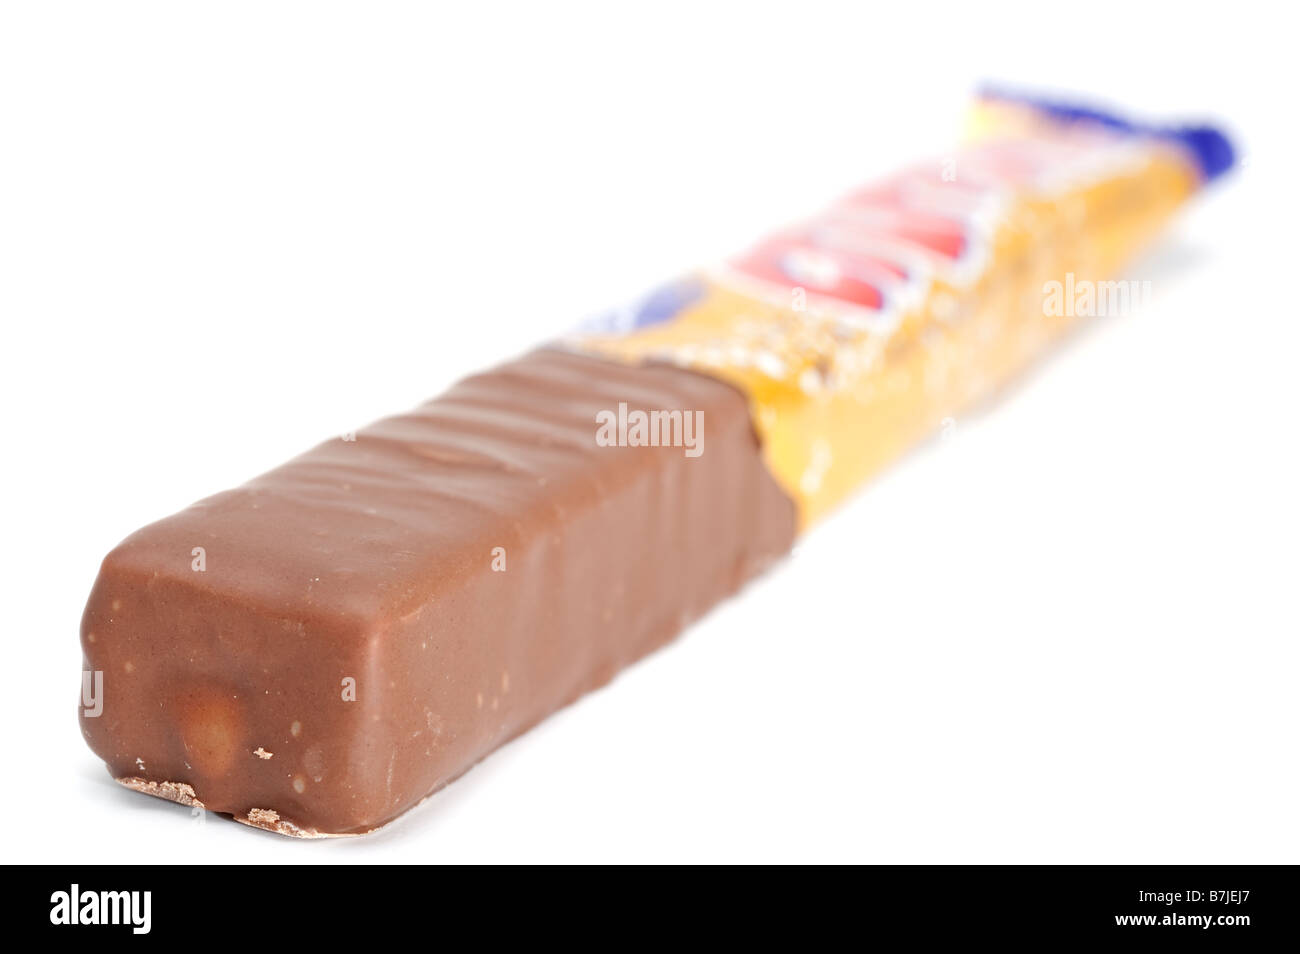 1 Bar of chocolate in wrapper Stock Photo